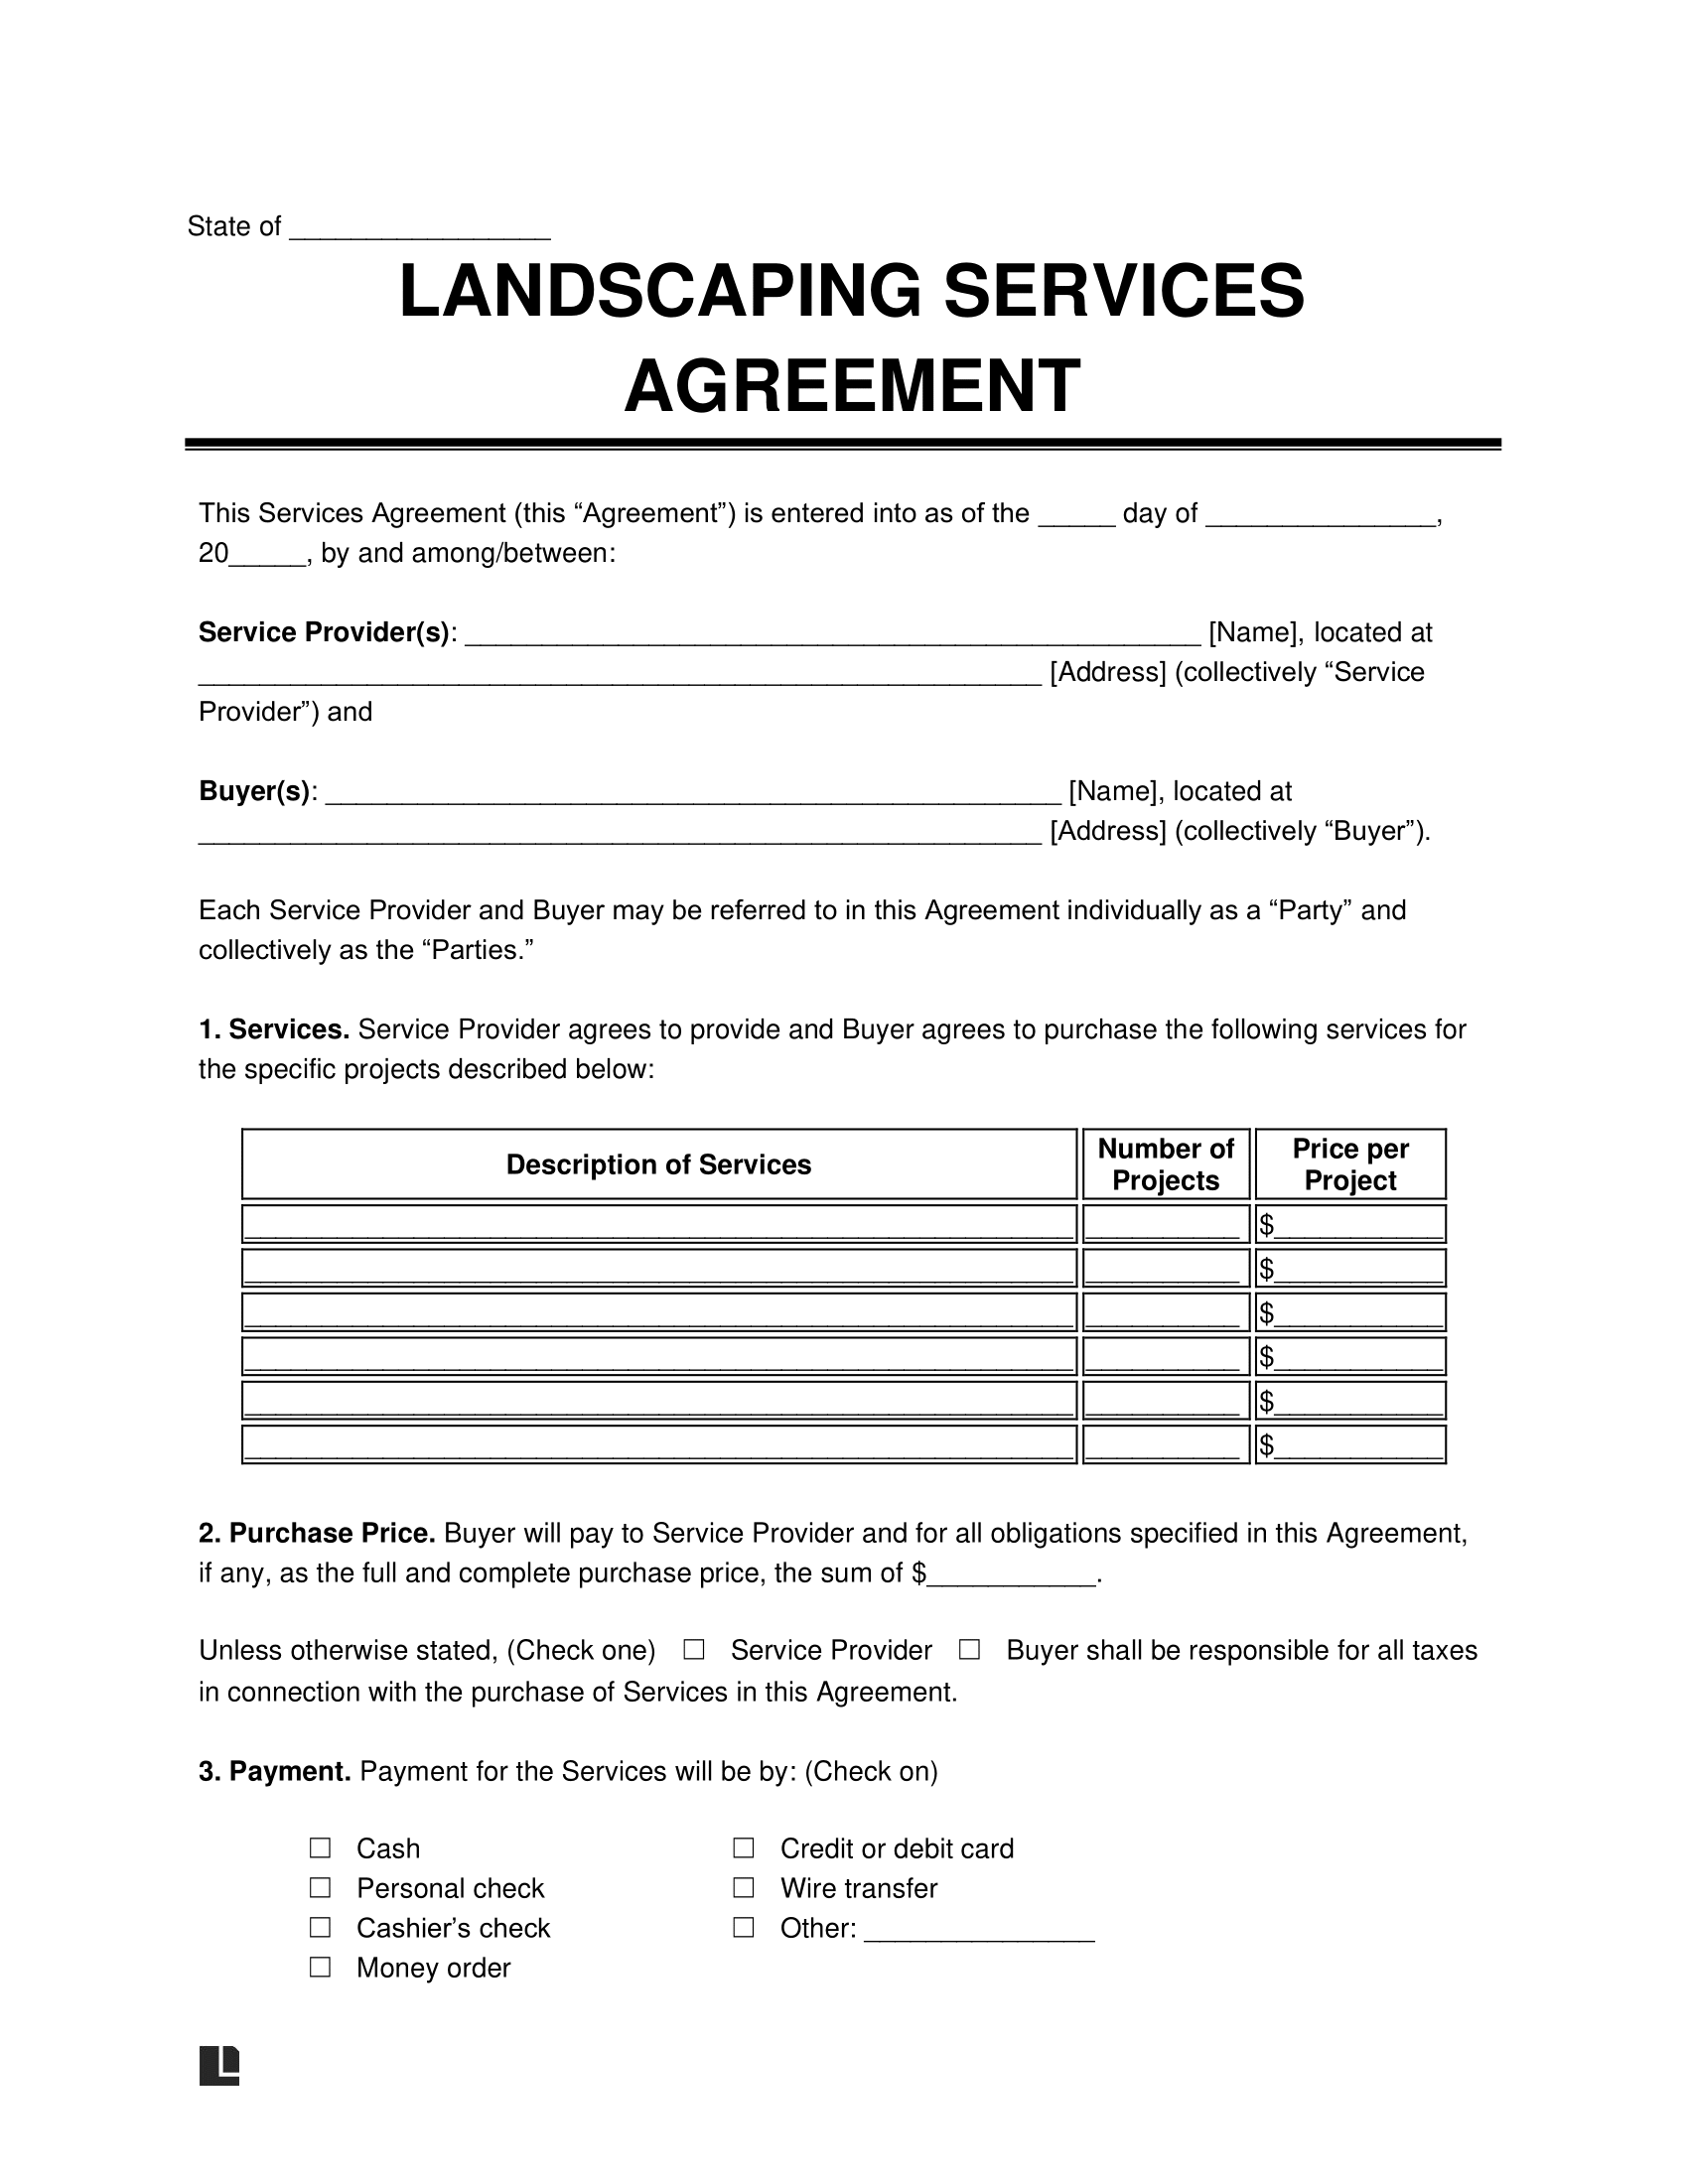 free-landscaping-contract-template-pdf-word-legal-templates-free-landscaping-contract